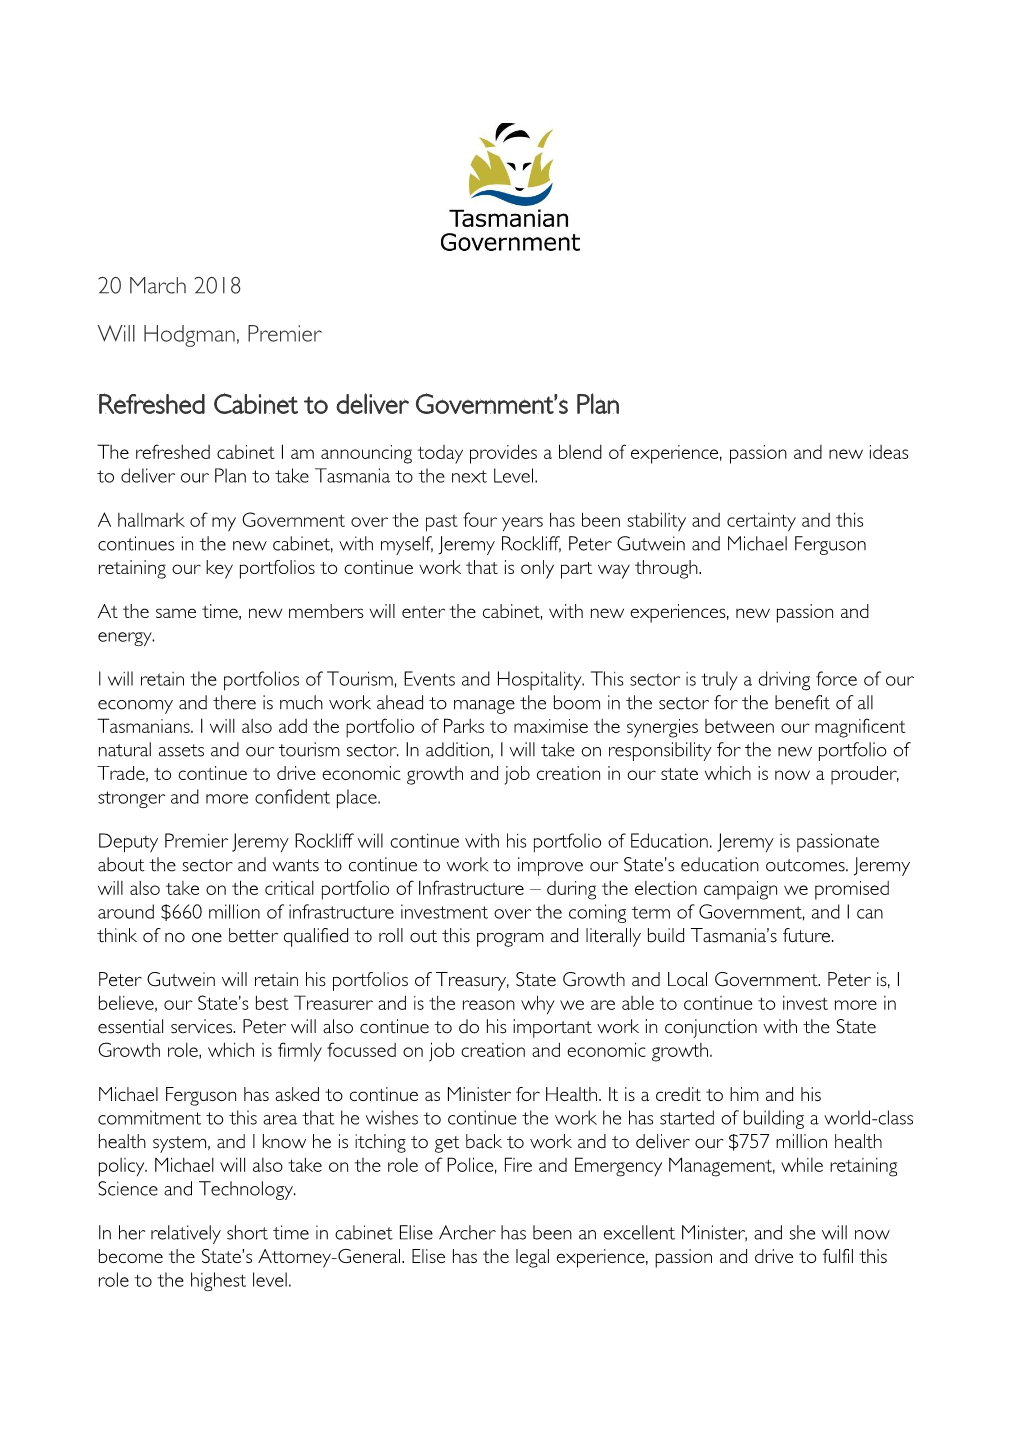 Refreshed Cabinet to Deliver Government's Plan